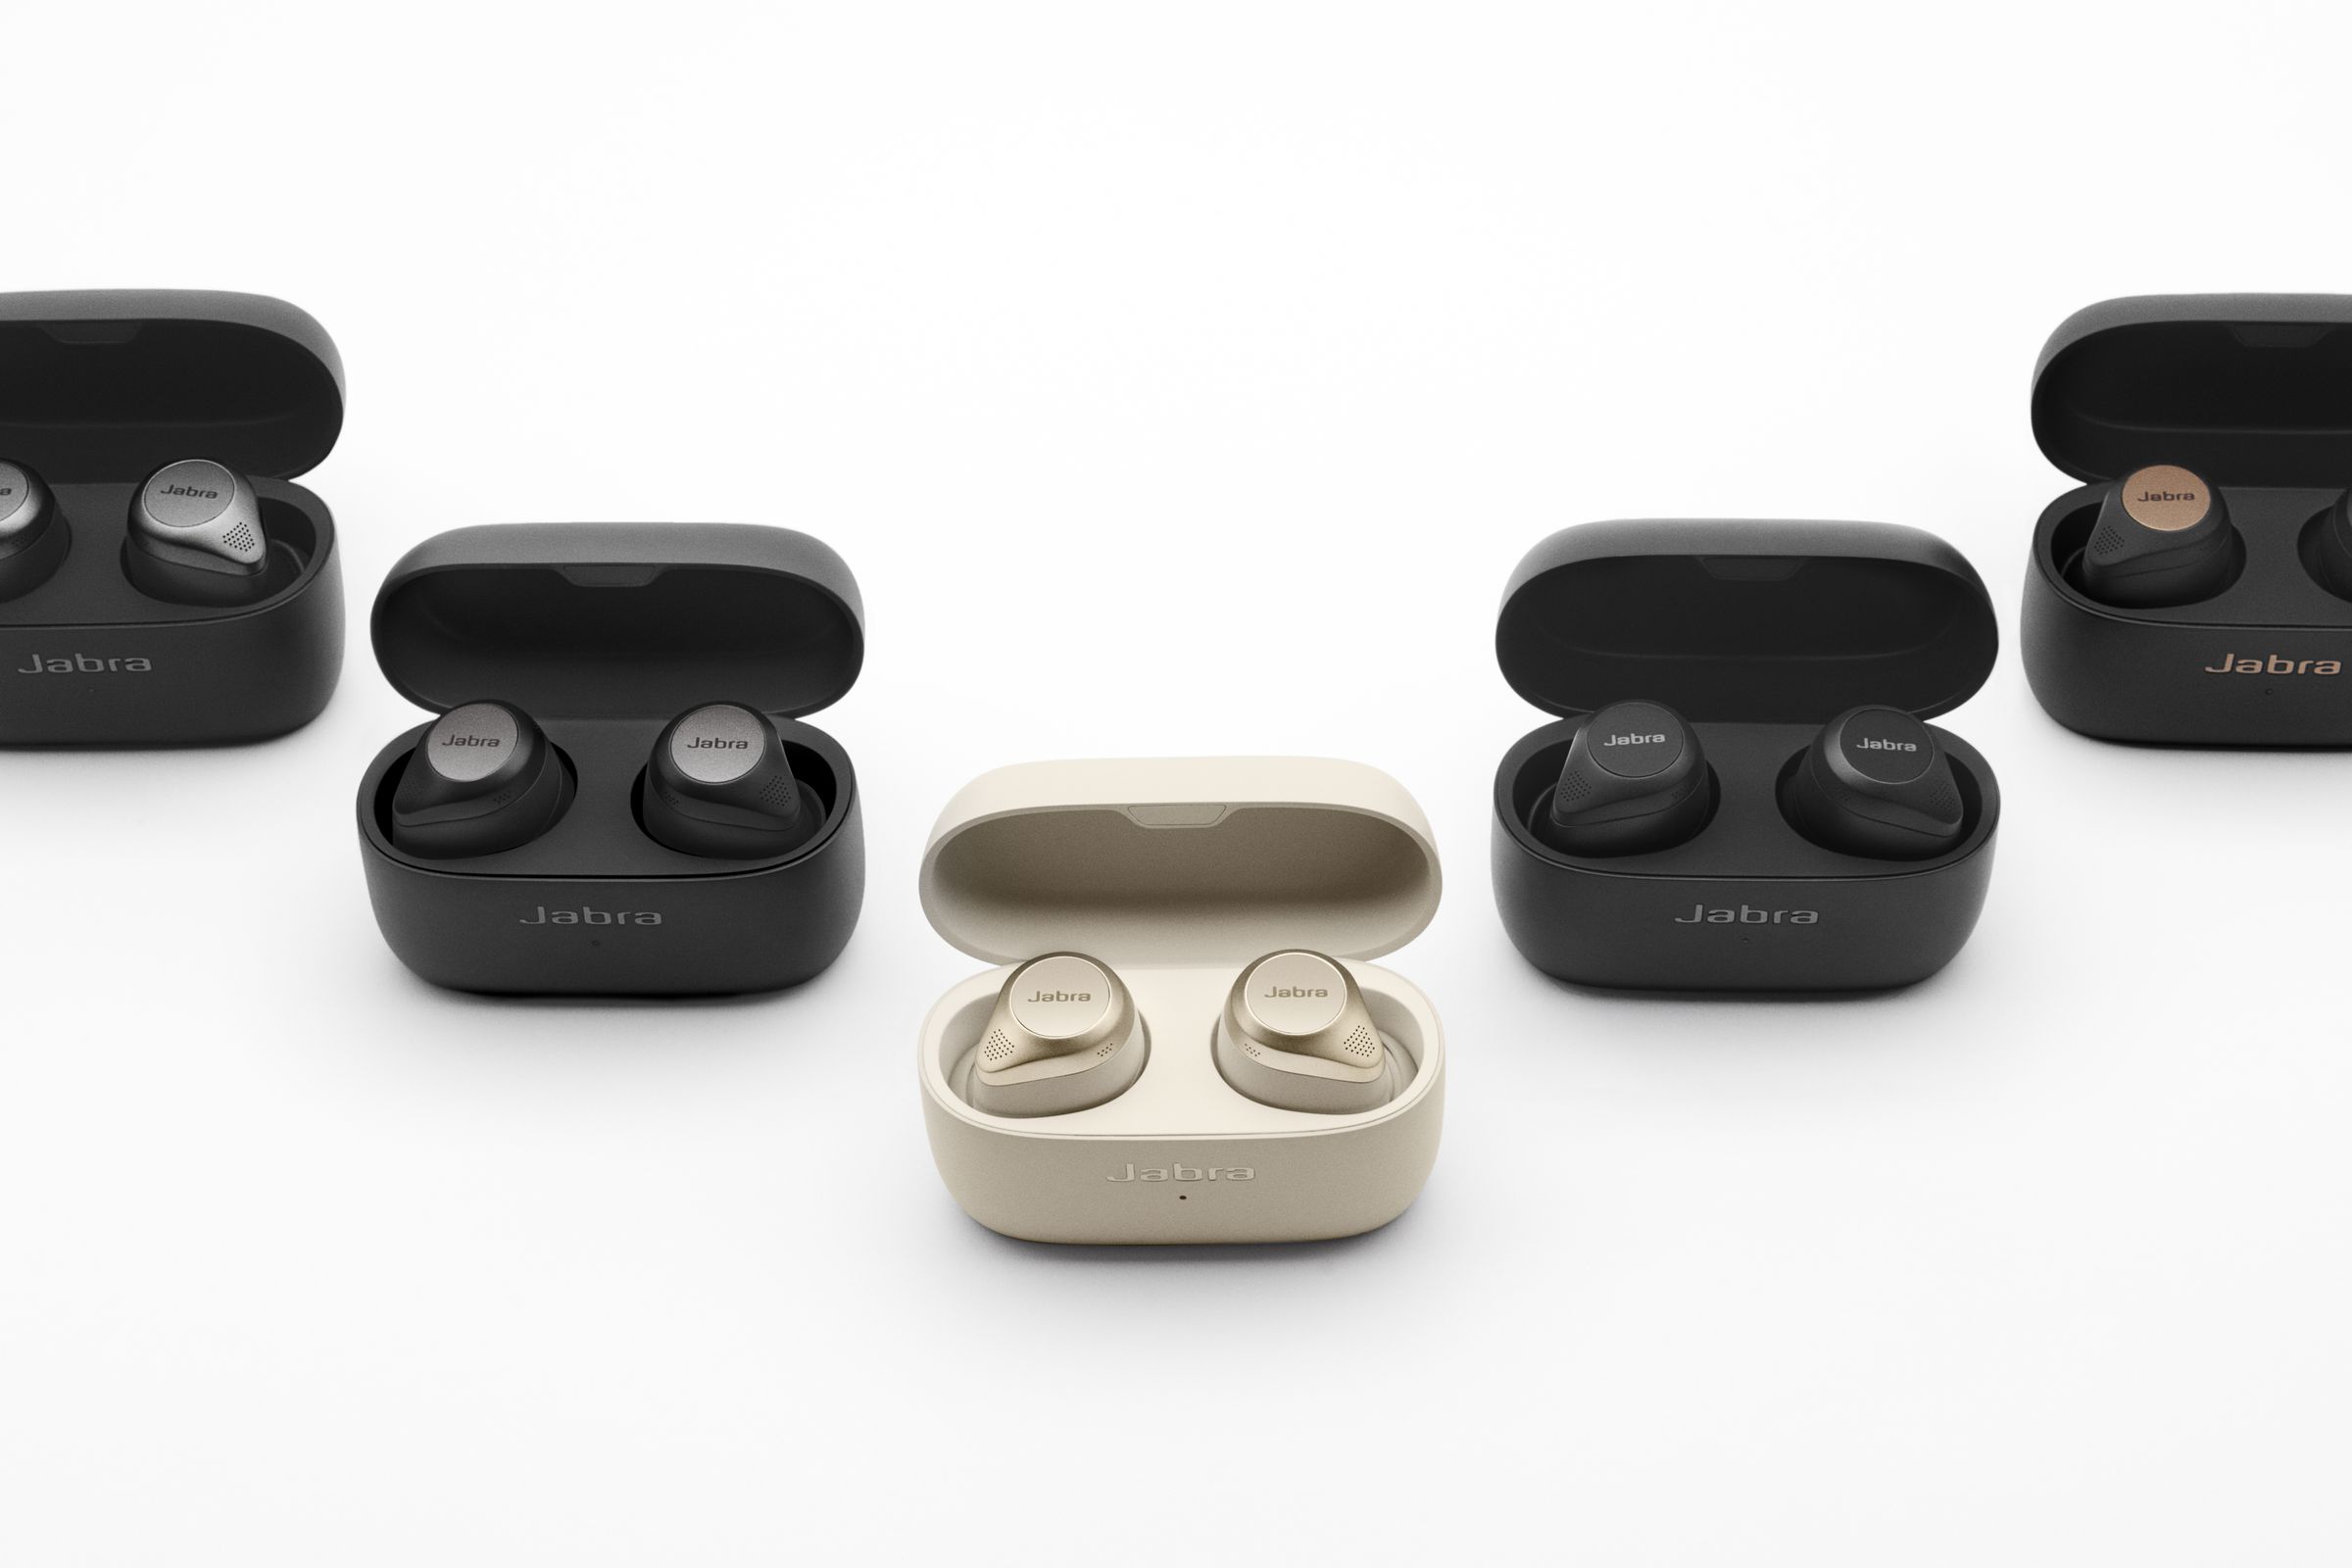 Four new colors will join the earbuds’ existing titanium and black model.